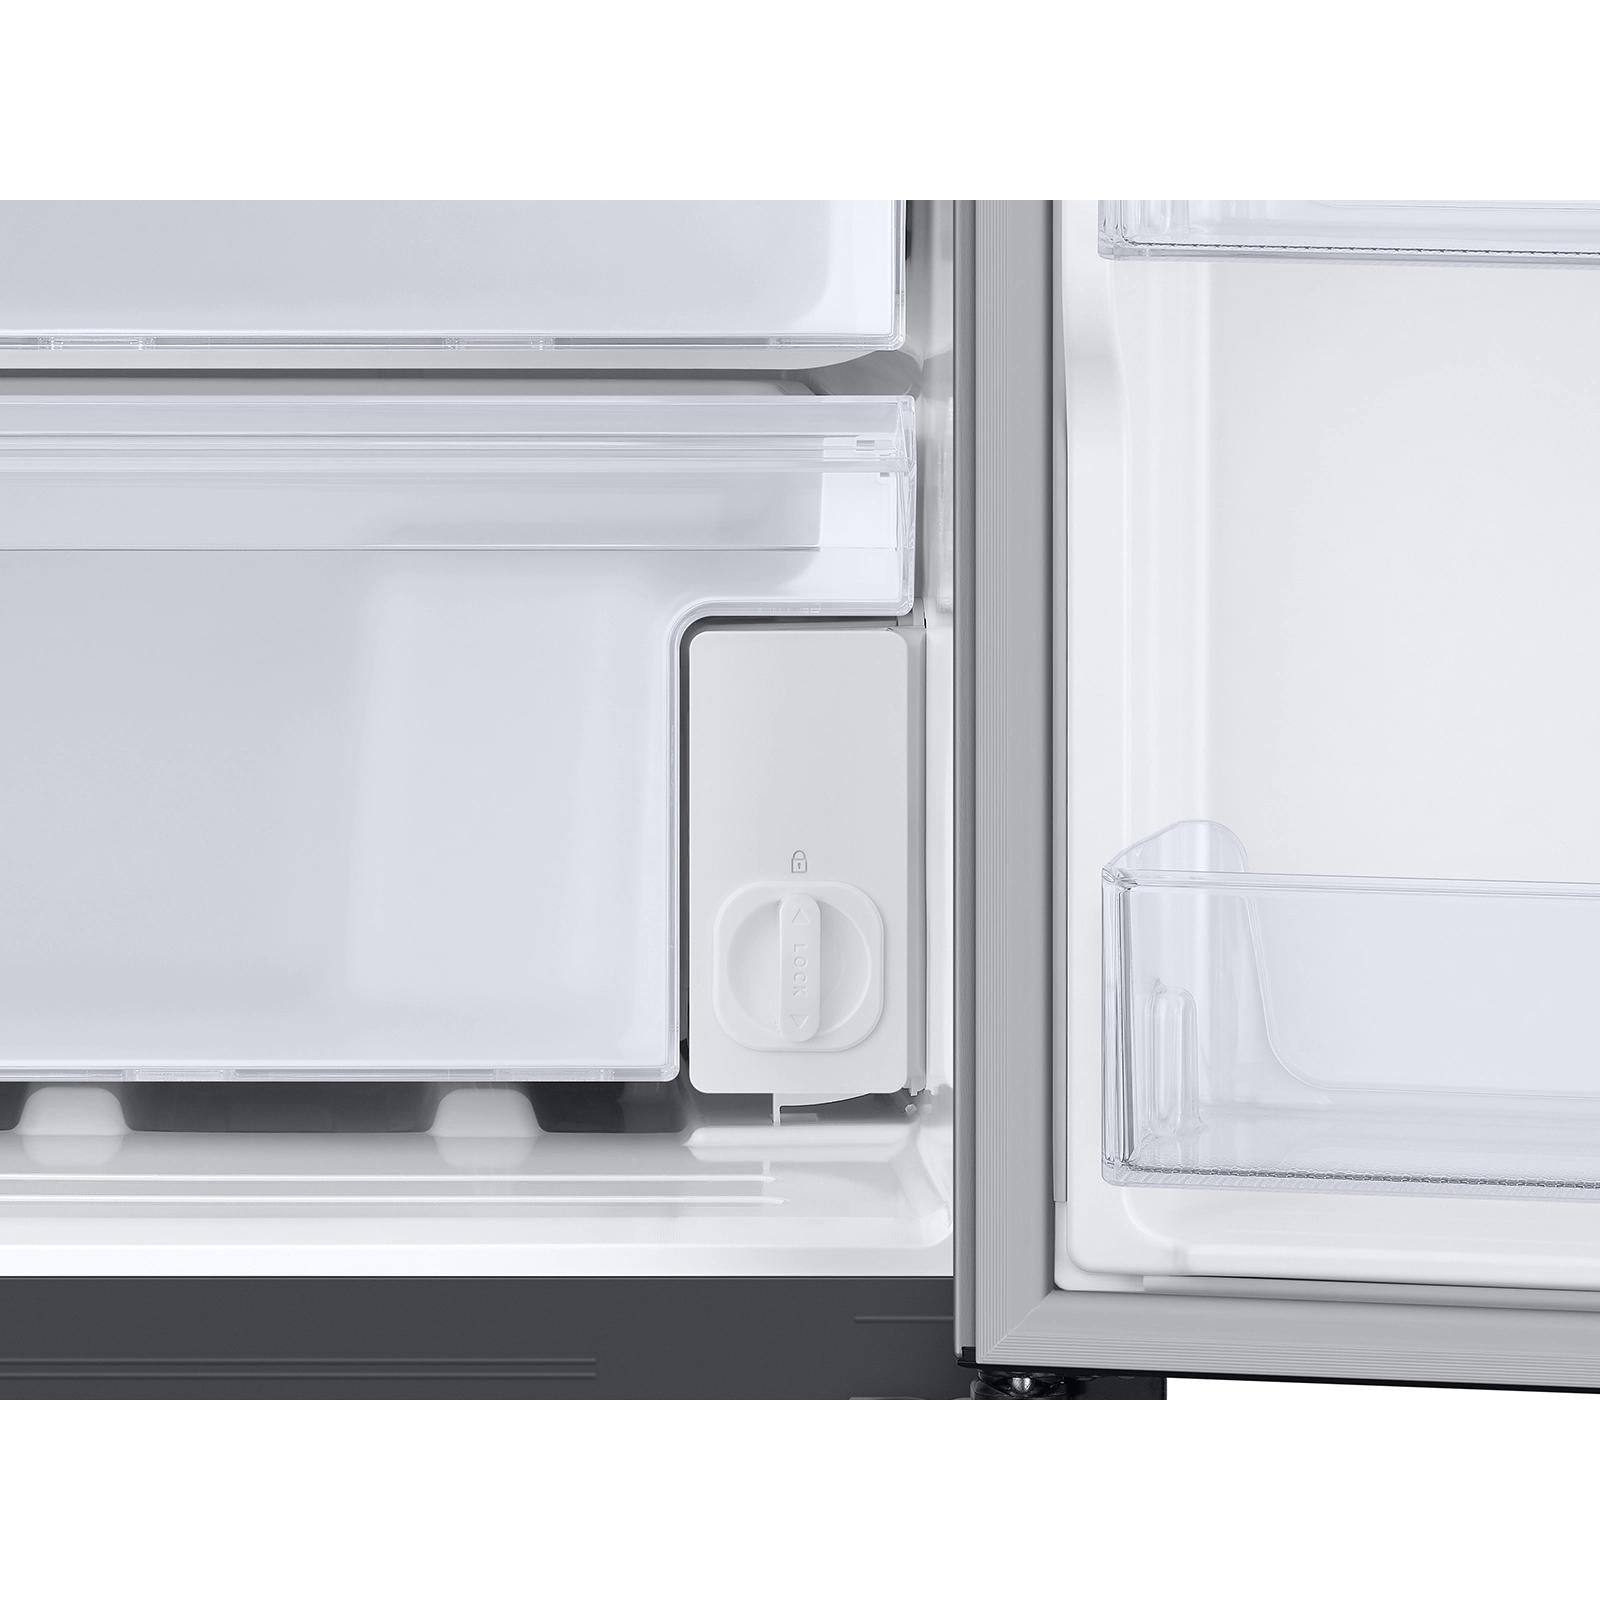 Samsung 36-inch, 28 cu.ft. Freestanding Side-by-Side Refrigerator with In-Door Ice Maker RS28A500ASR/AA